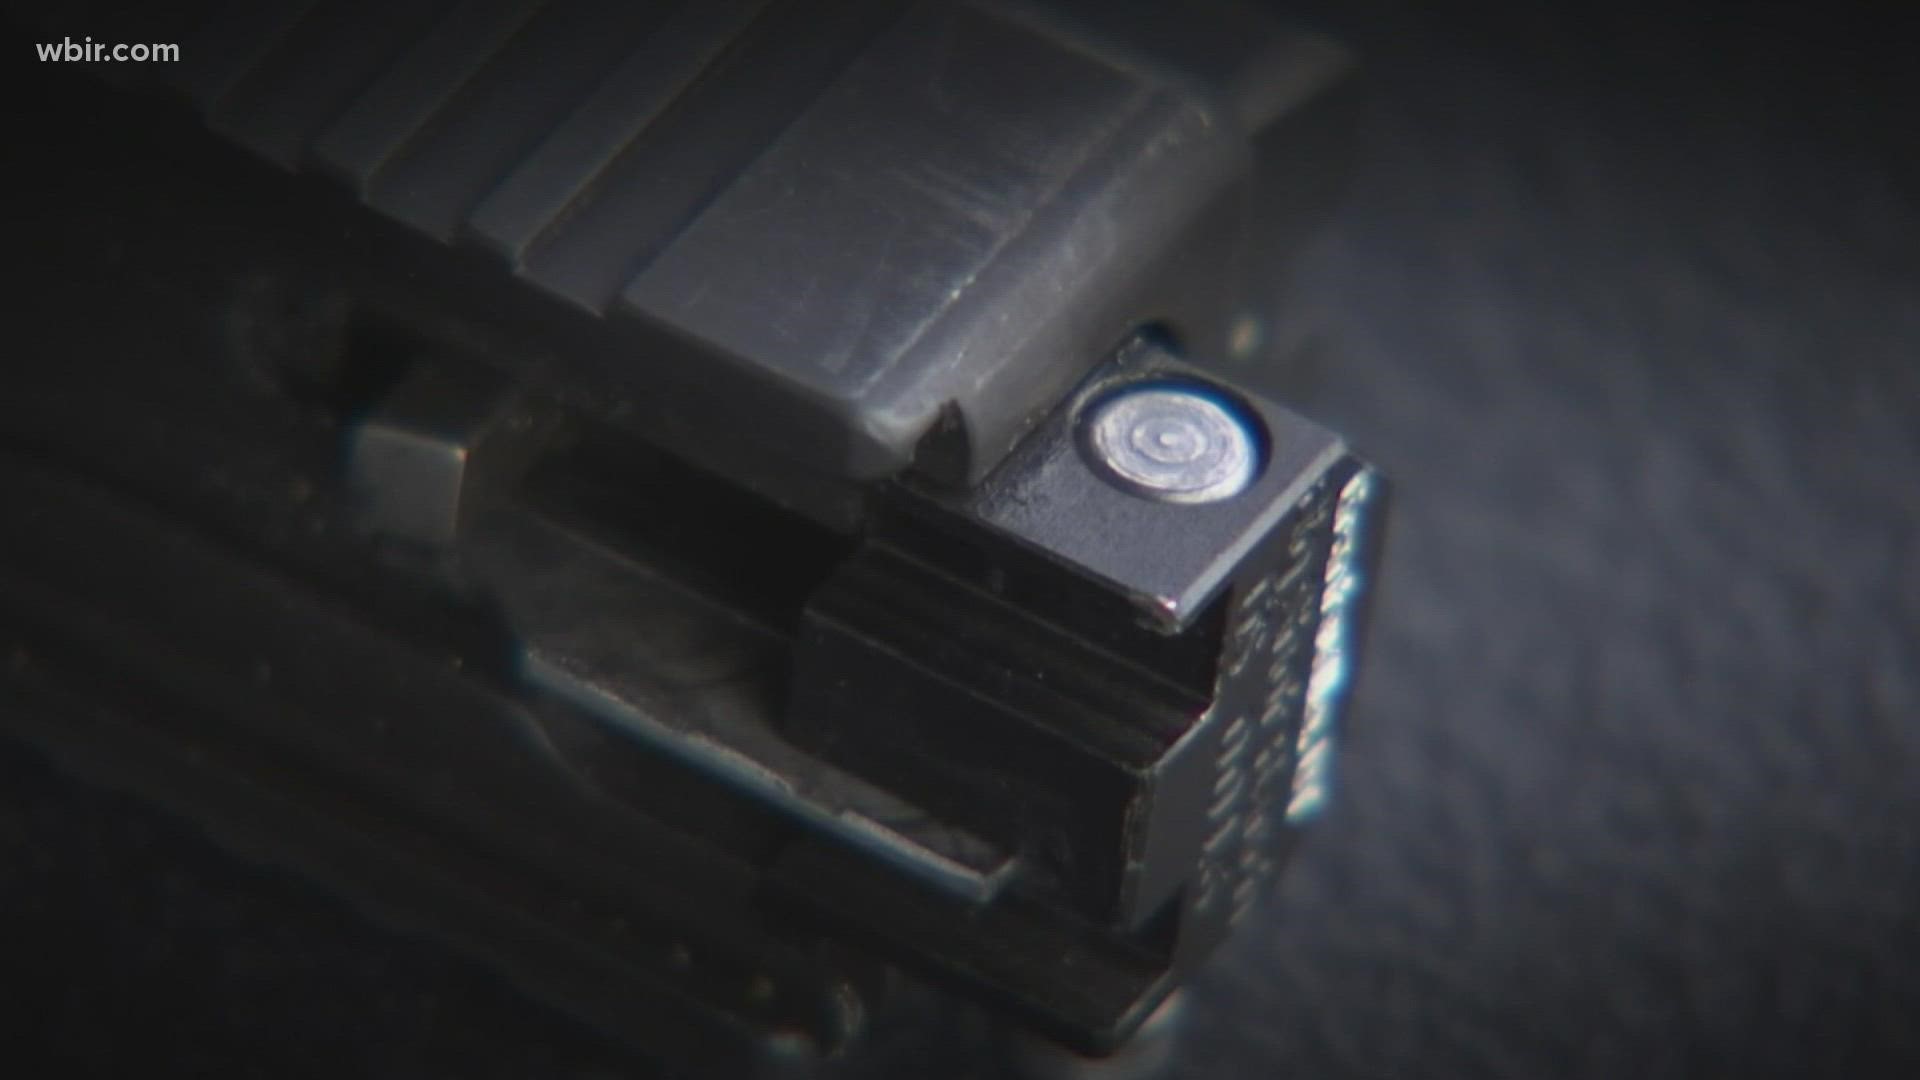 The switches effectively allow a handgun to fire at rates similar to automatic weapons.